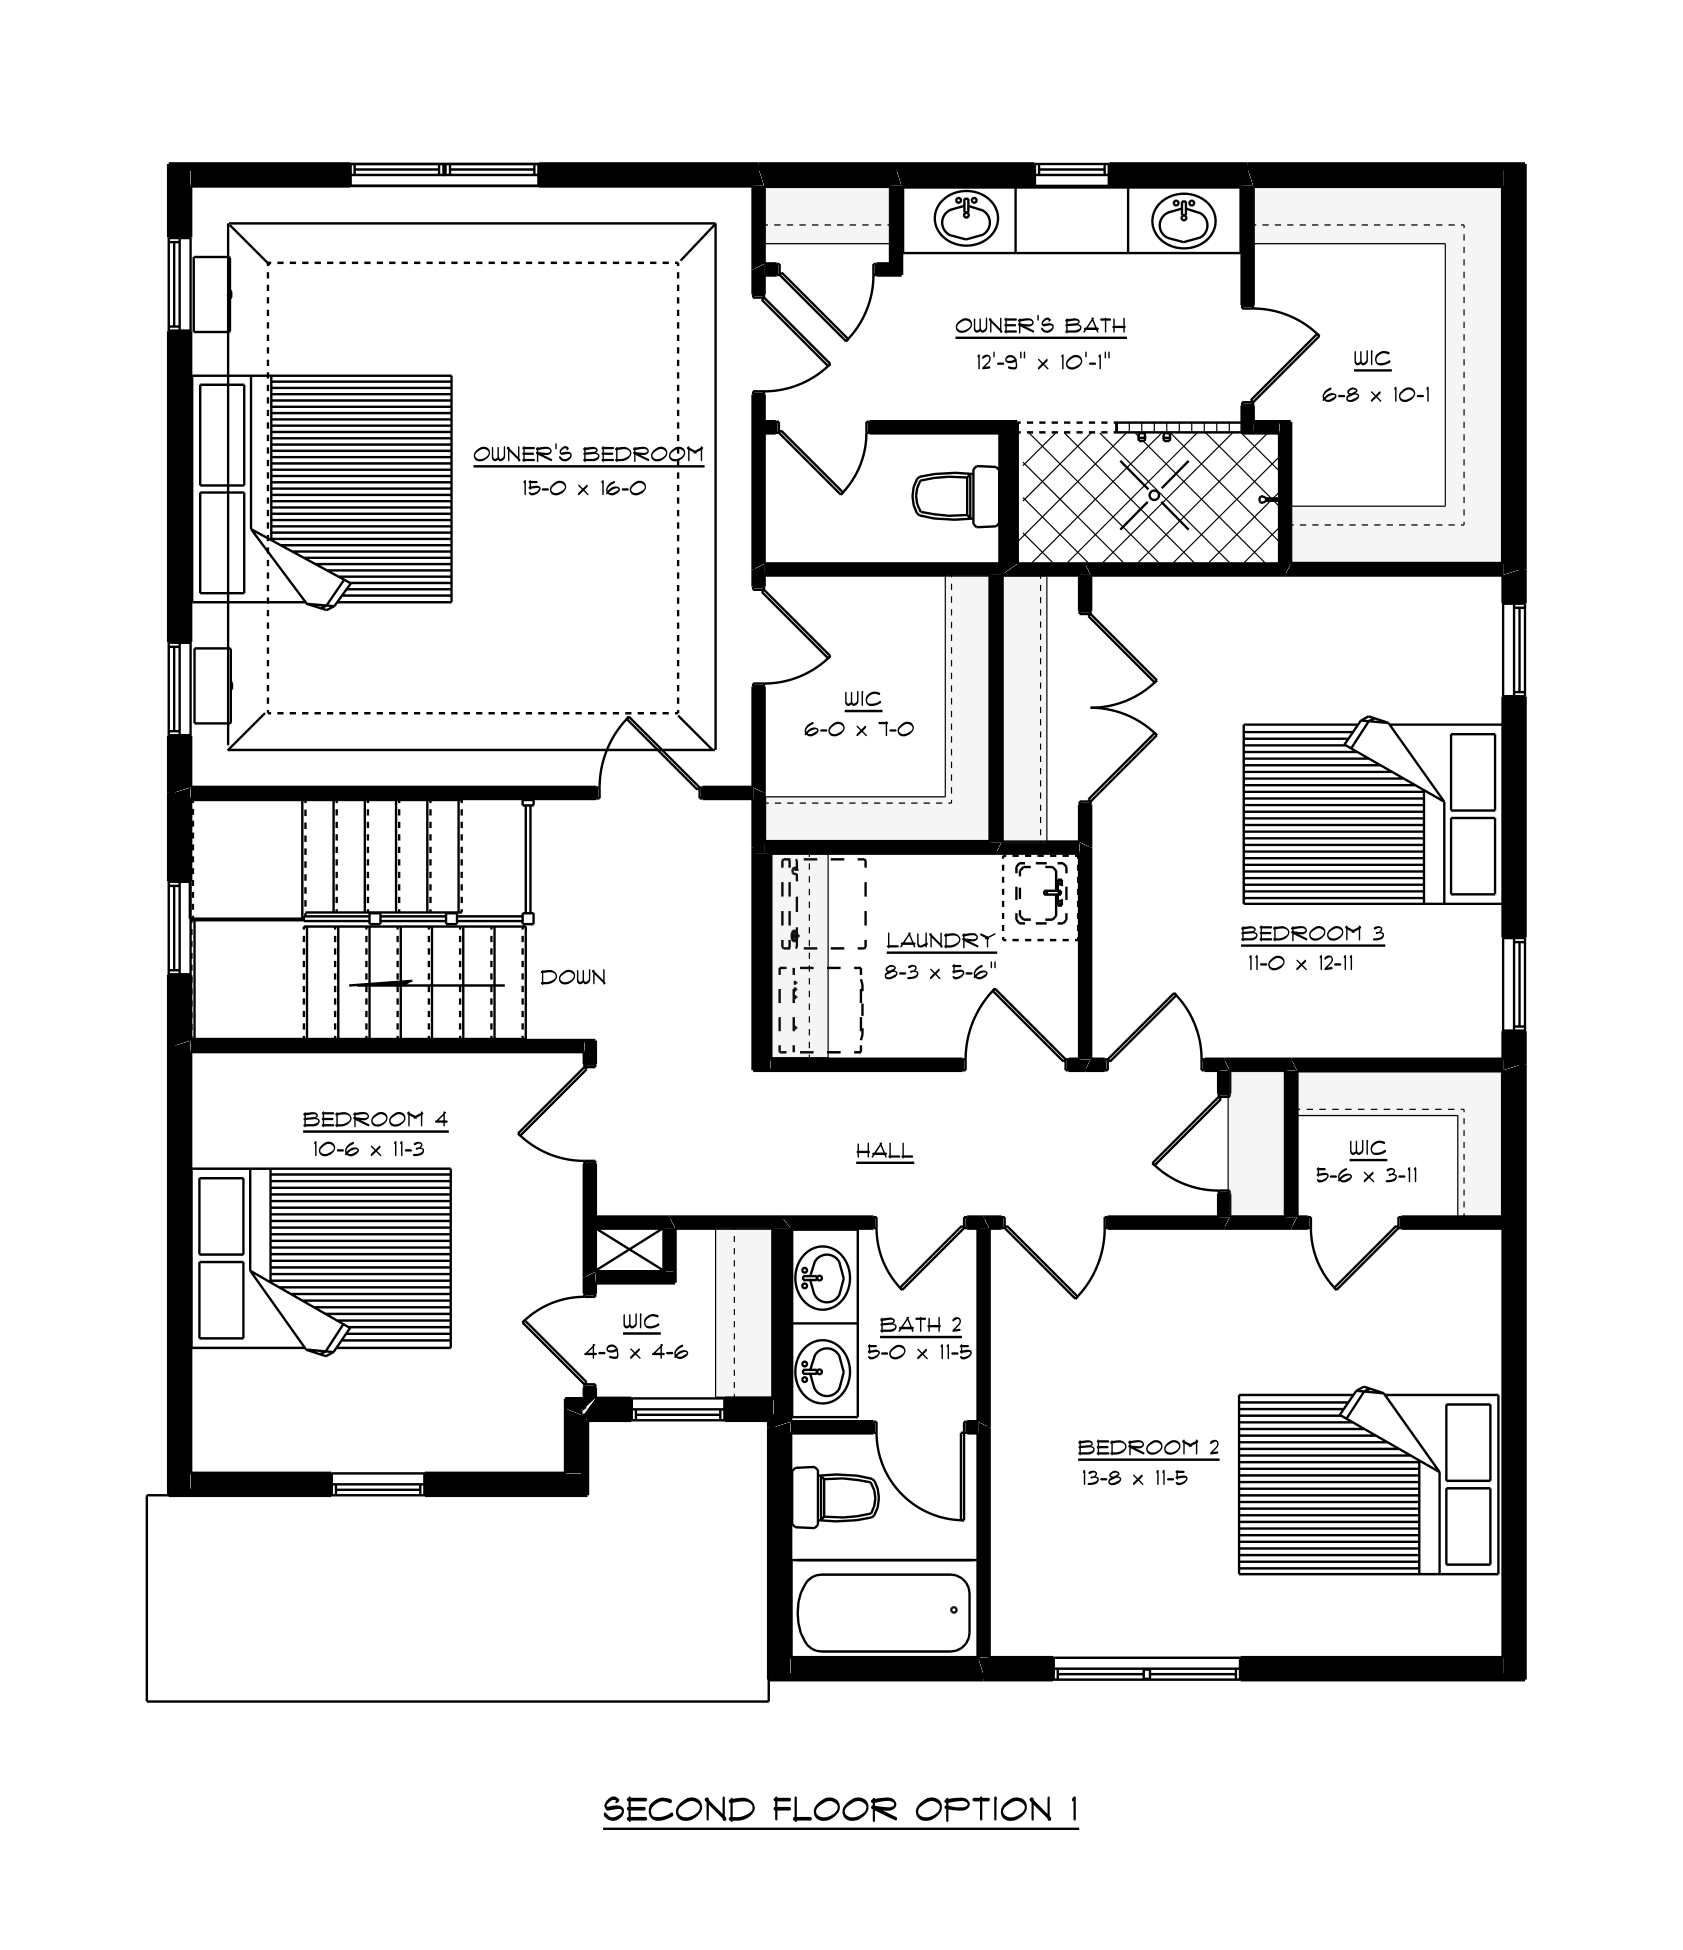 2nd Floor Plans of the Stockton built by Craig Builders